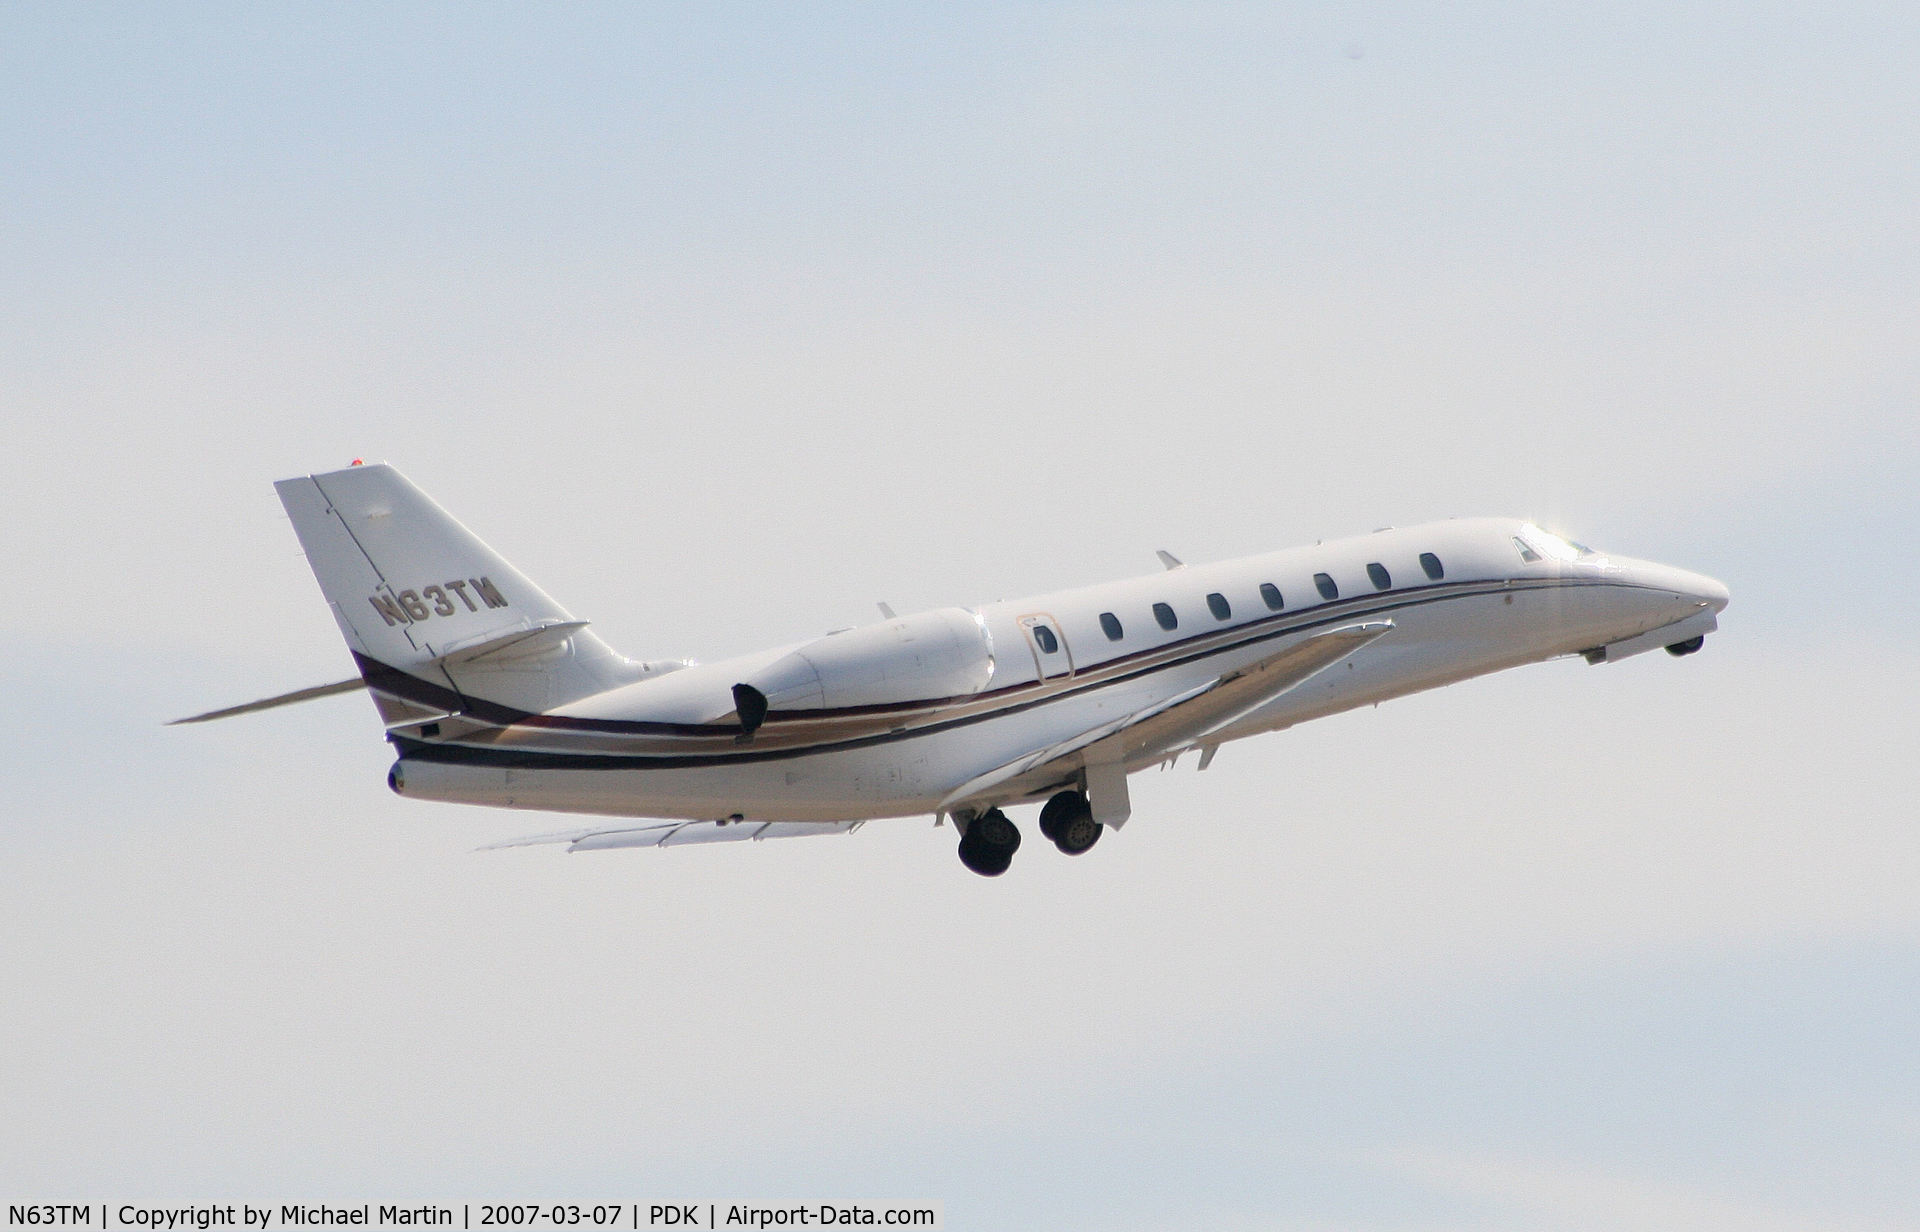 N63TM, 2005 Cessna 680 Citation Sovereign C/N 680-0019, Departing PDK enroute to CDC